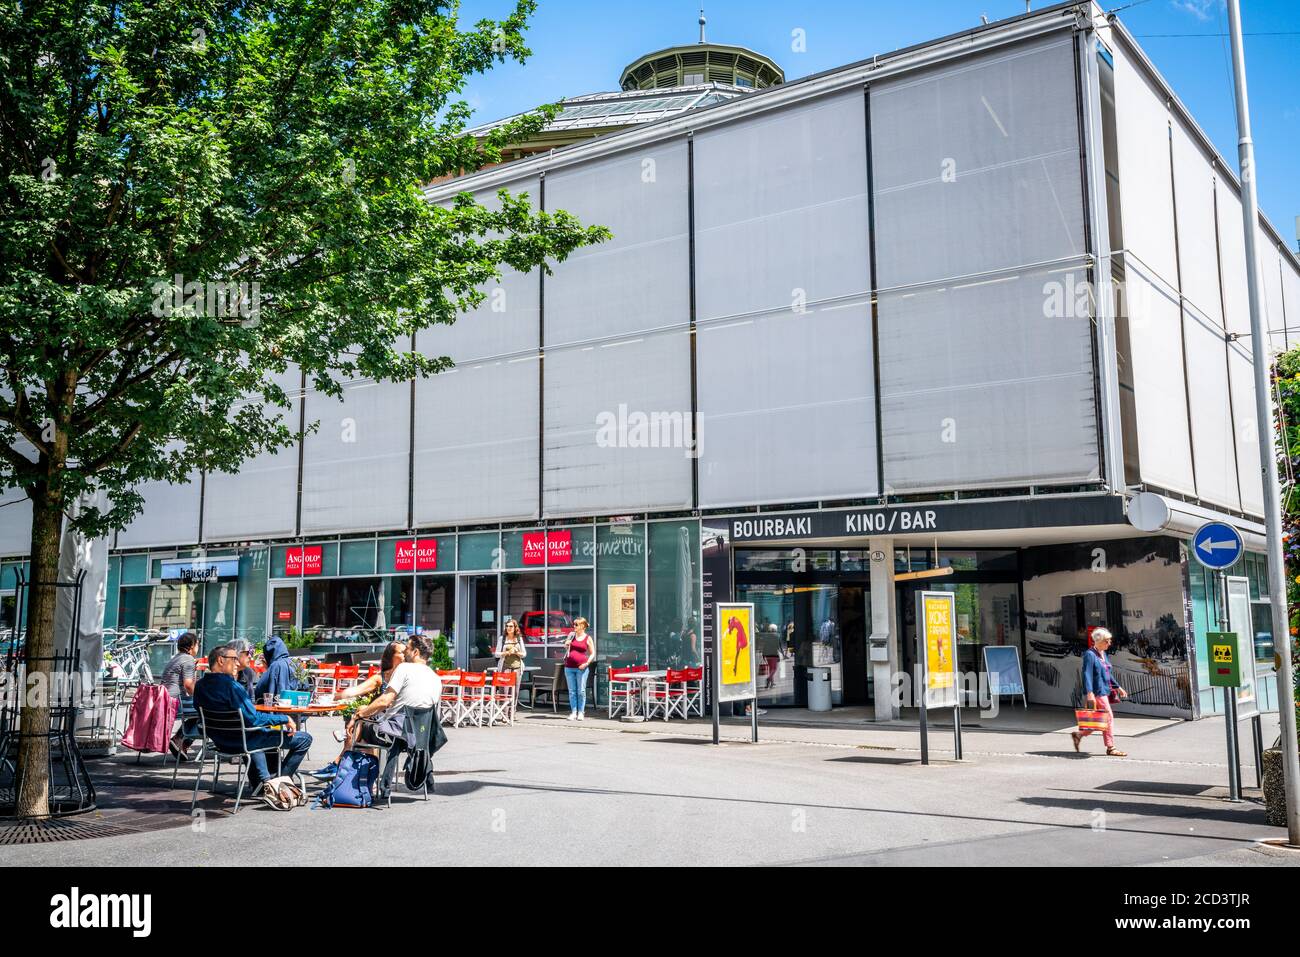 Lucerne Switzerland , 29 June 2020 : People at a restaurant terrace in front of Bourbaki panorama building with entrance view in Lucerne Switzerland Stock Photo